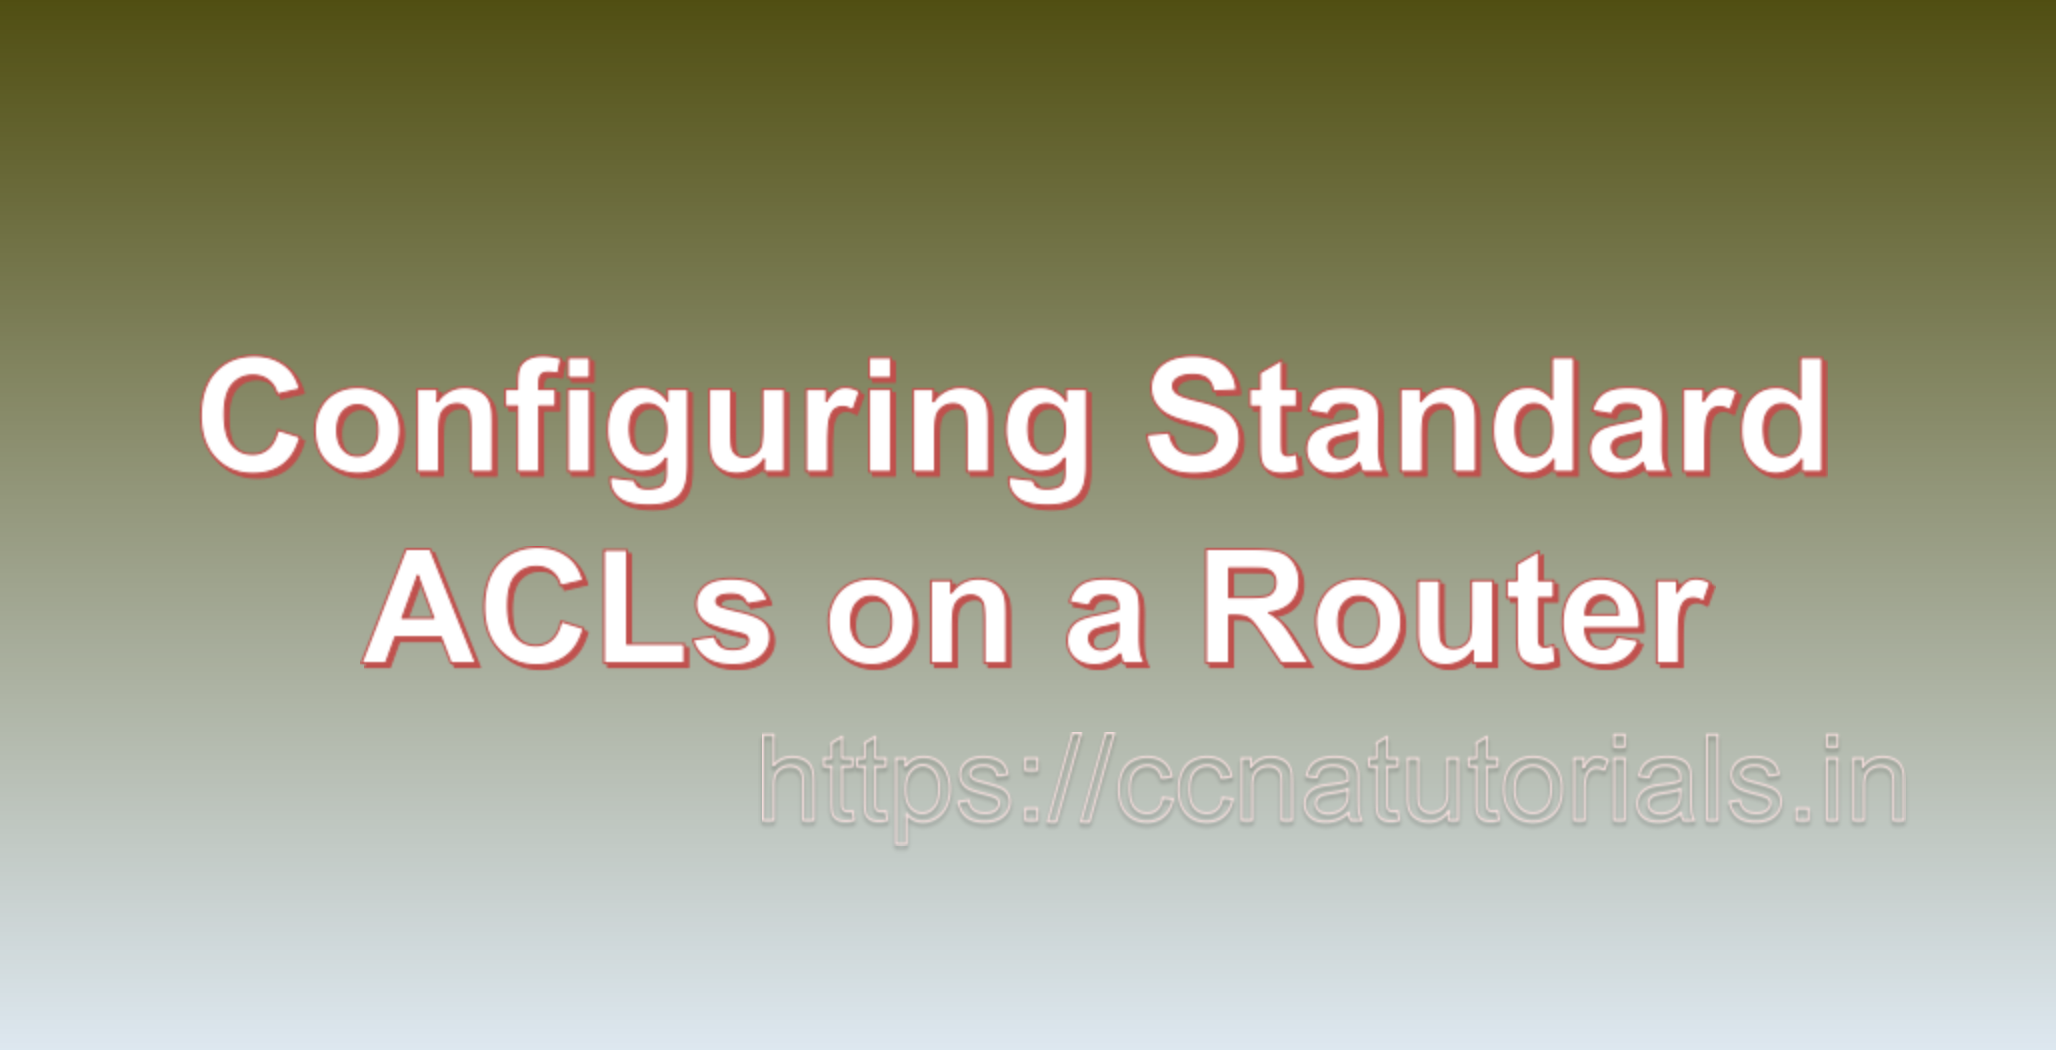 Configuring Standard ACLs on a Router, ccna, ccna tutorials